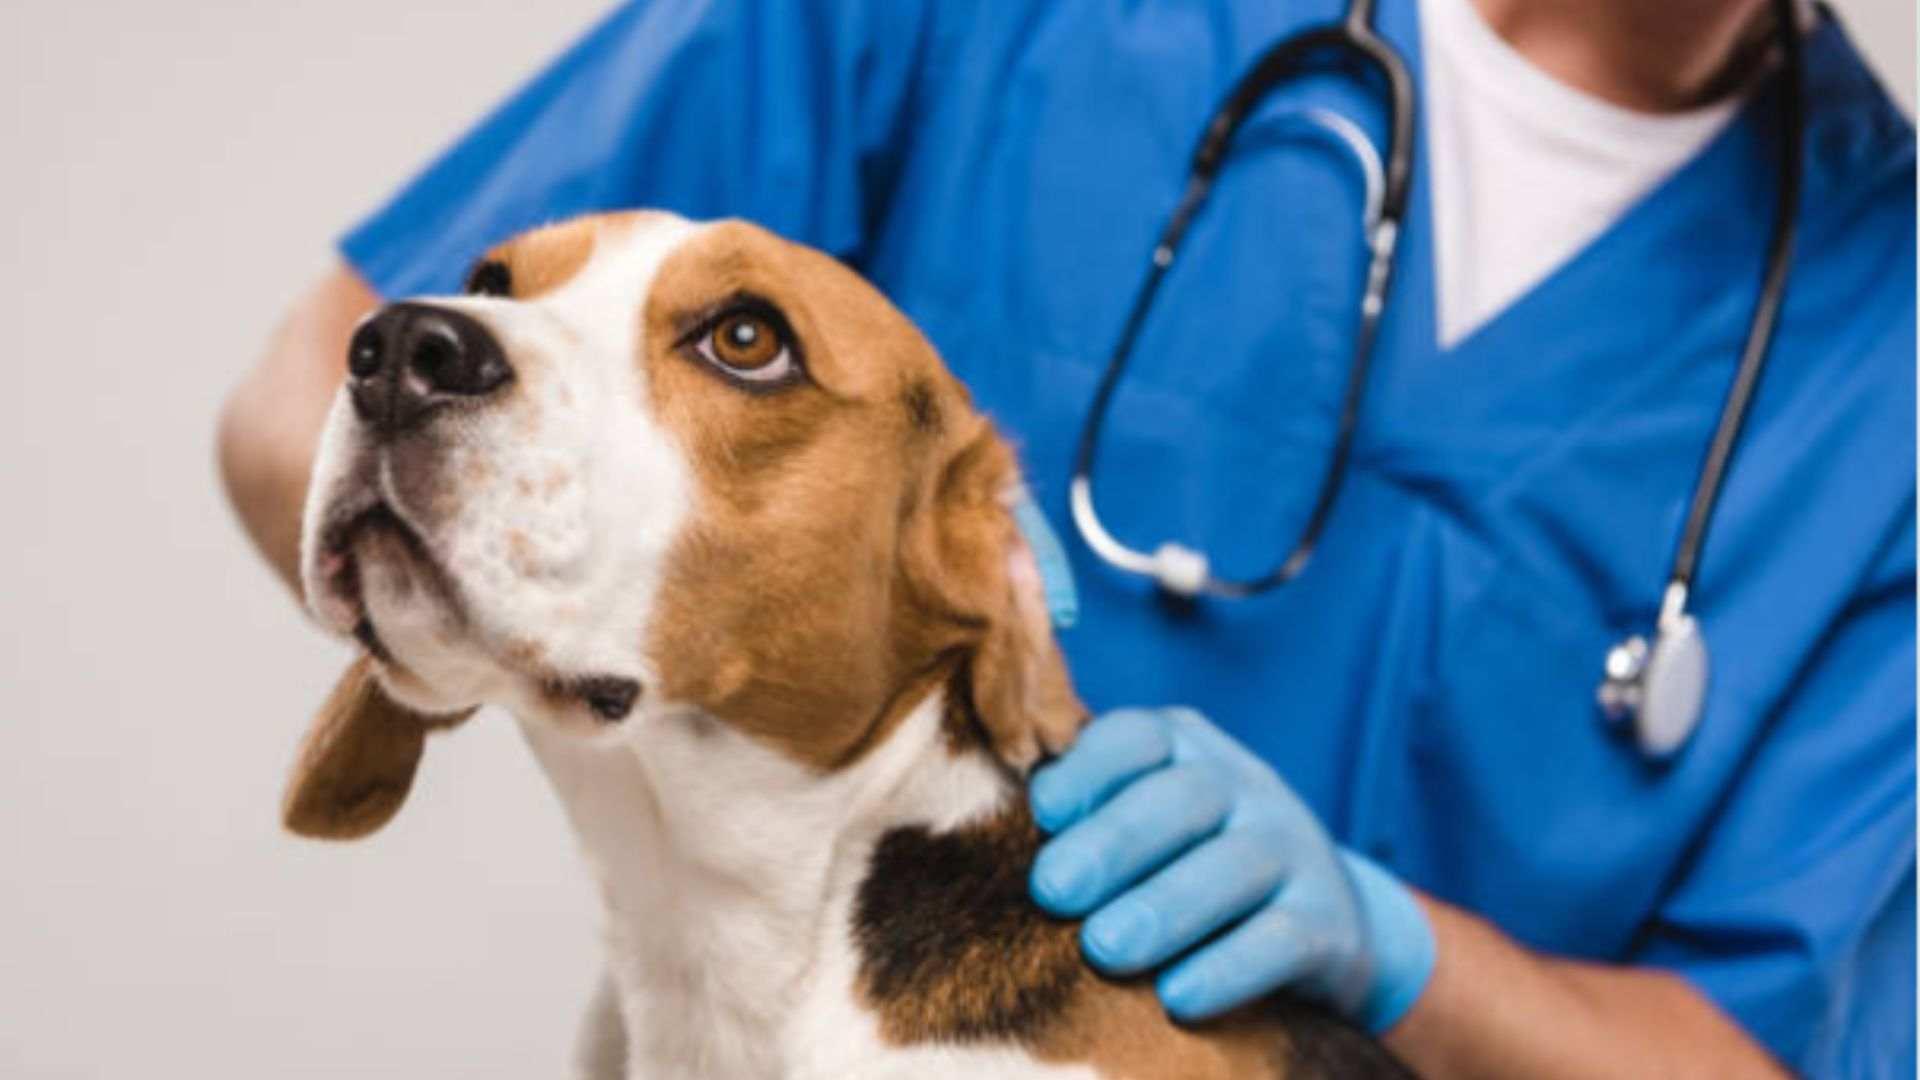 Why are rabies boosters required?